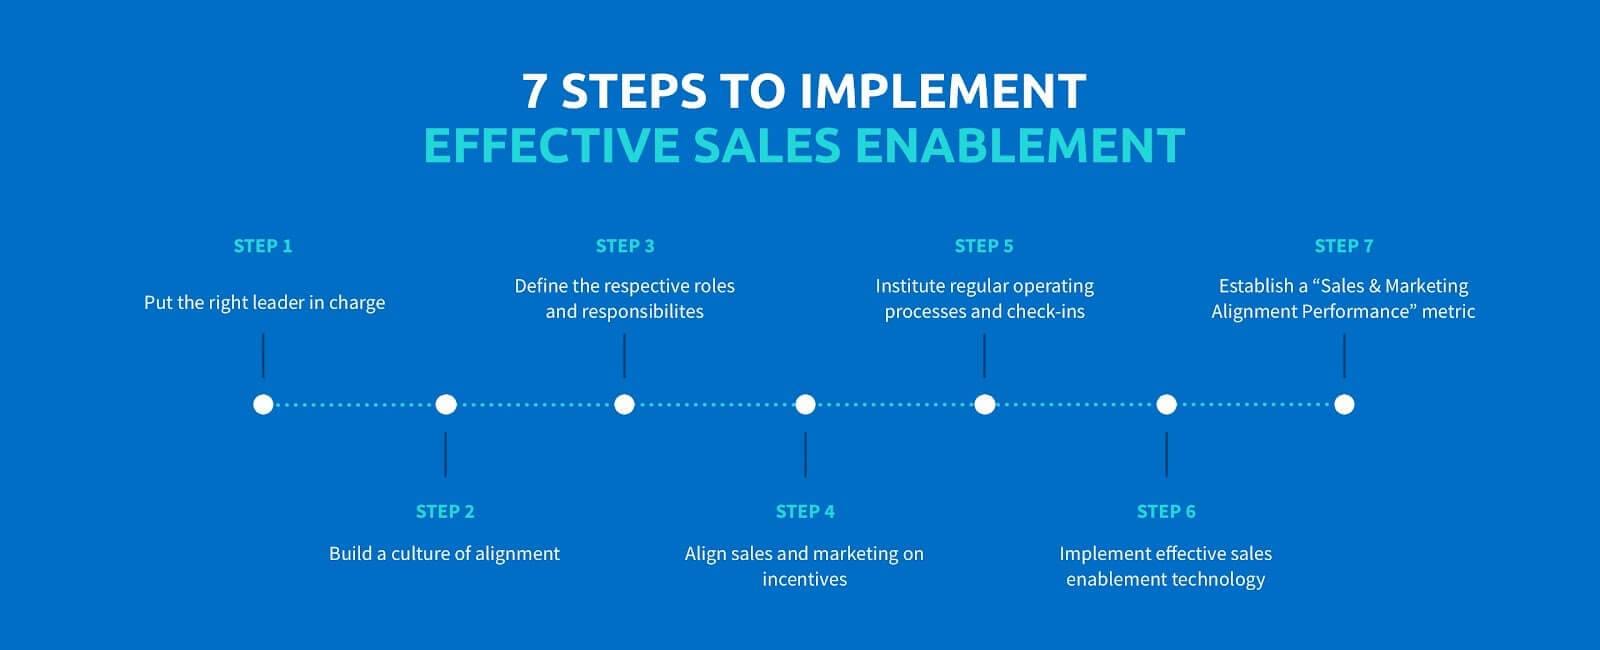 7. Sales Enablement as a Sales Strategy